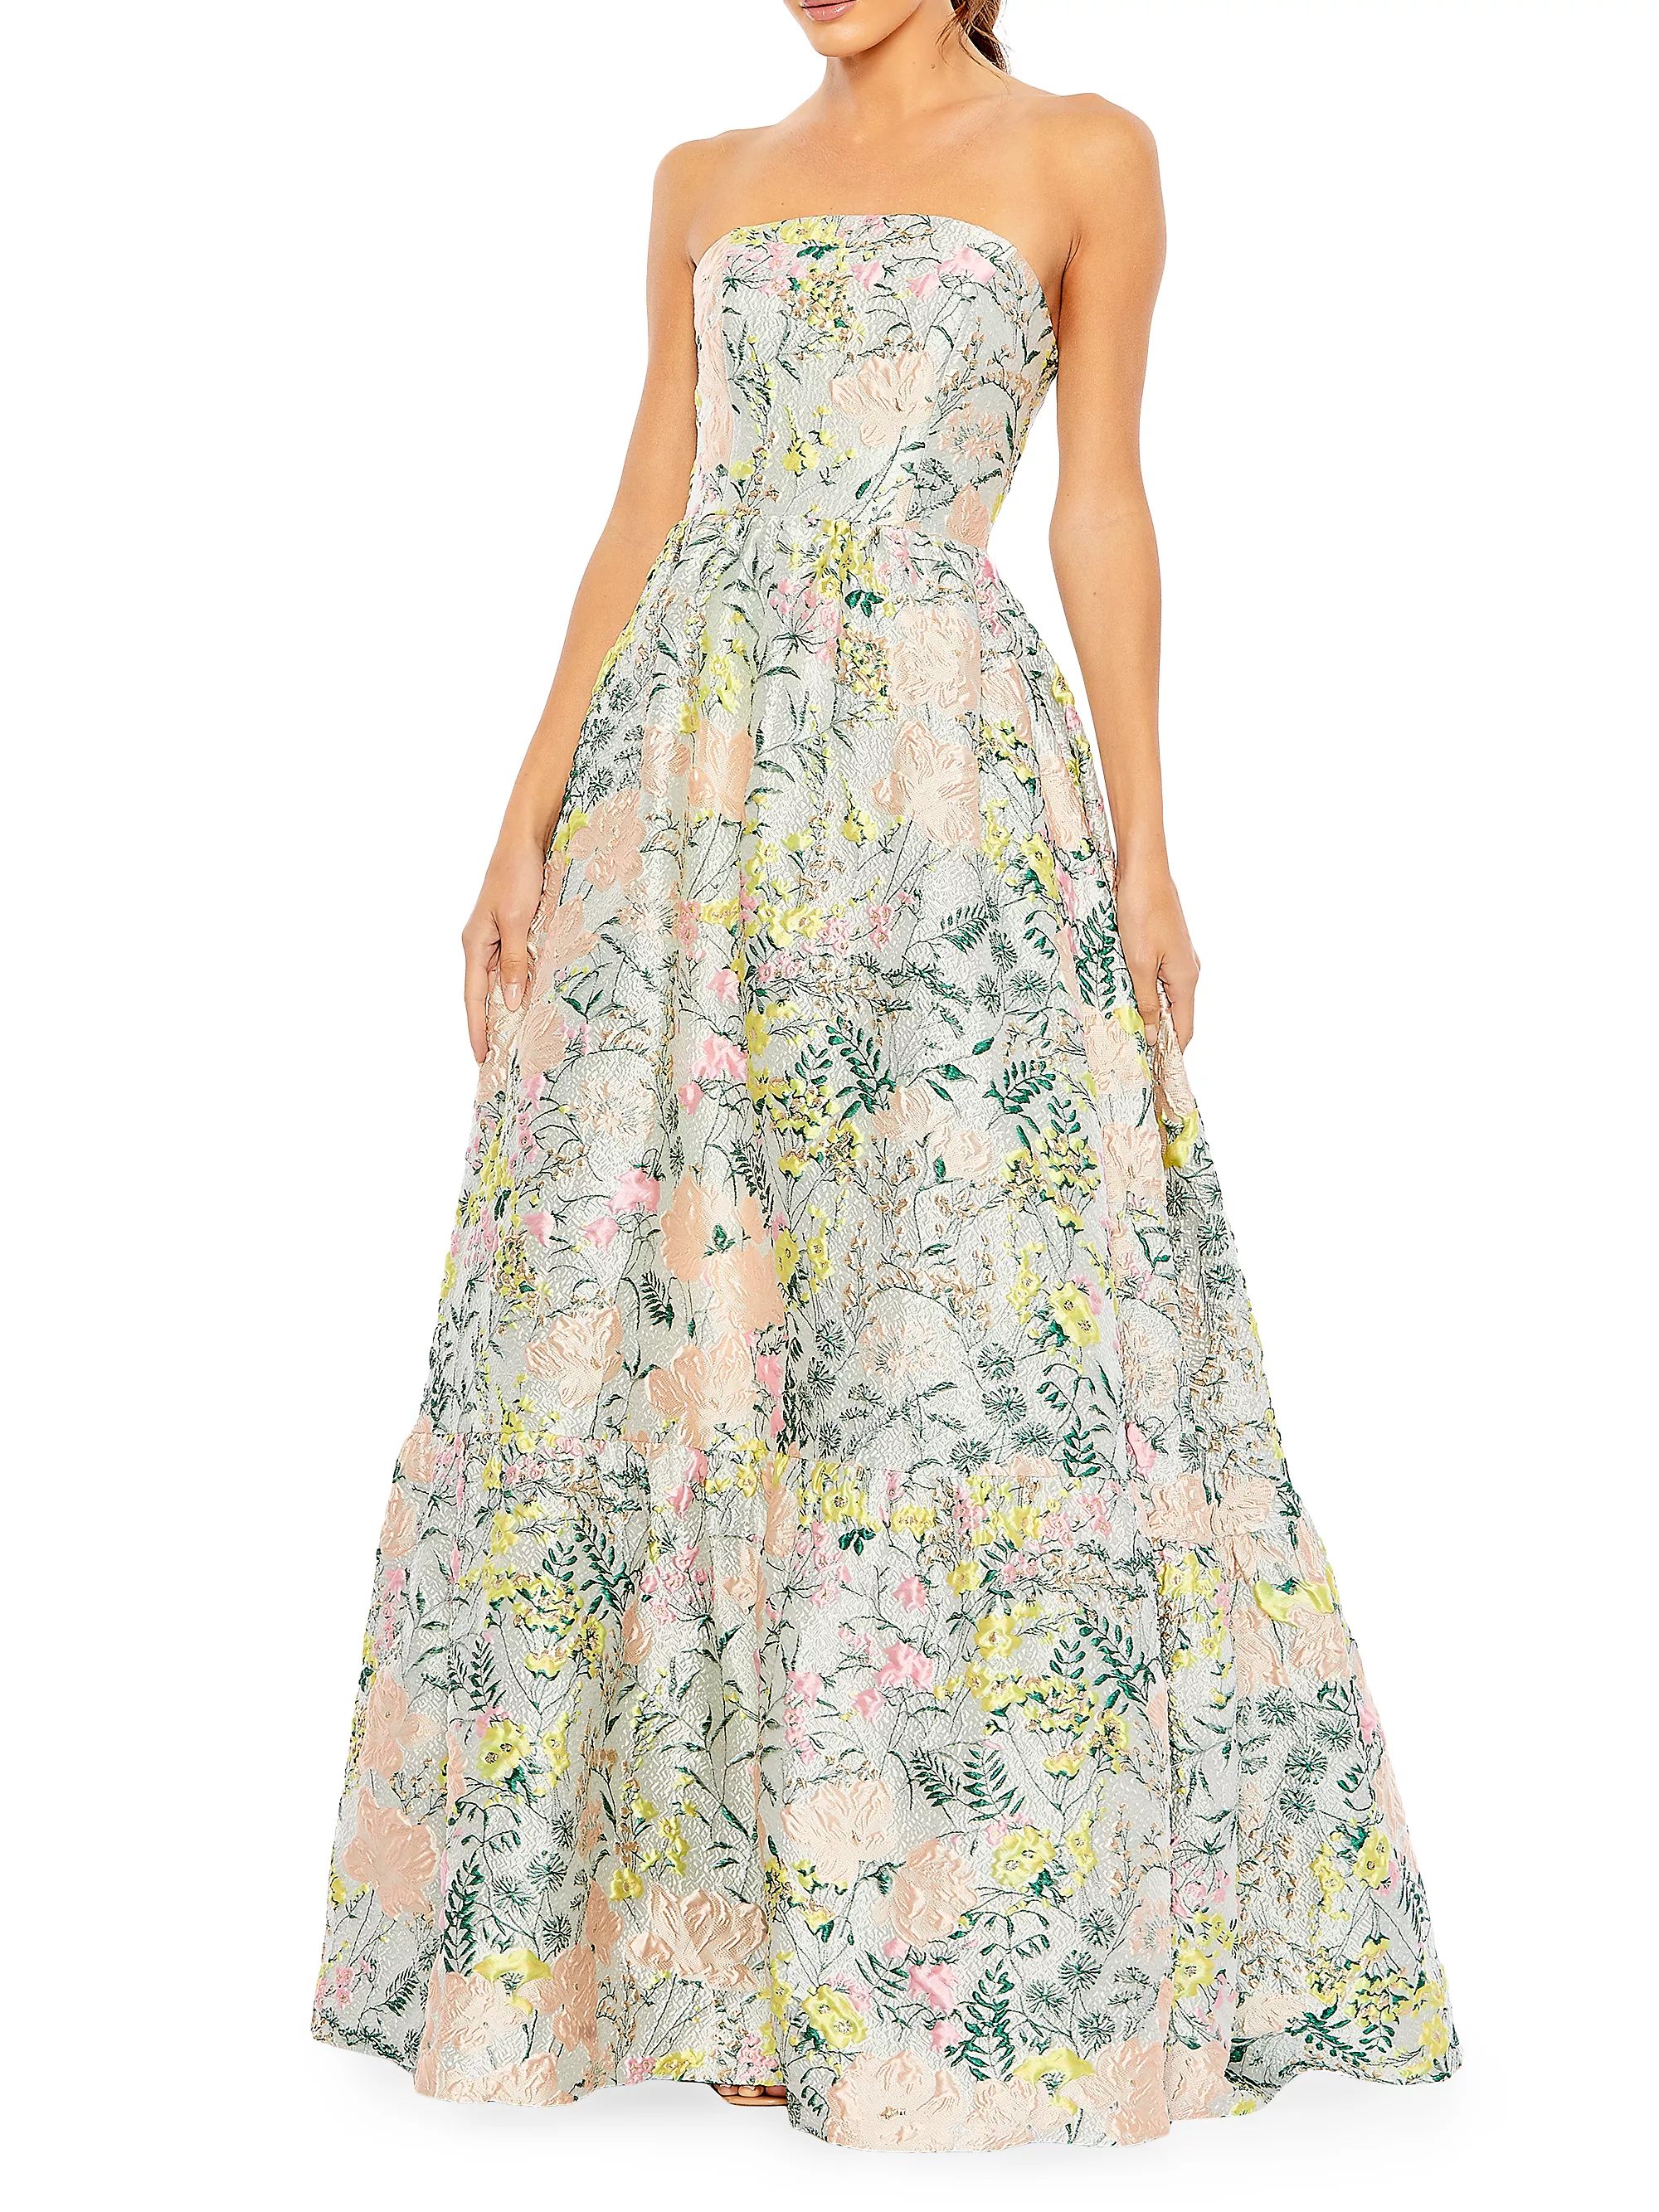 Pastel MultiAll Evening GownsMac DuggalFloral Brocade Ball Gown$798
            
          20% Of... | Saks Fifth Avenue